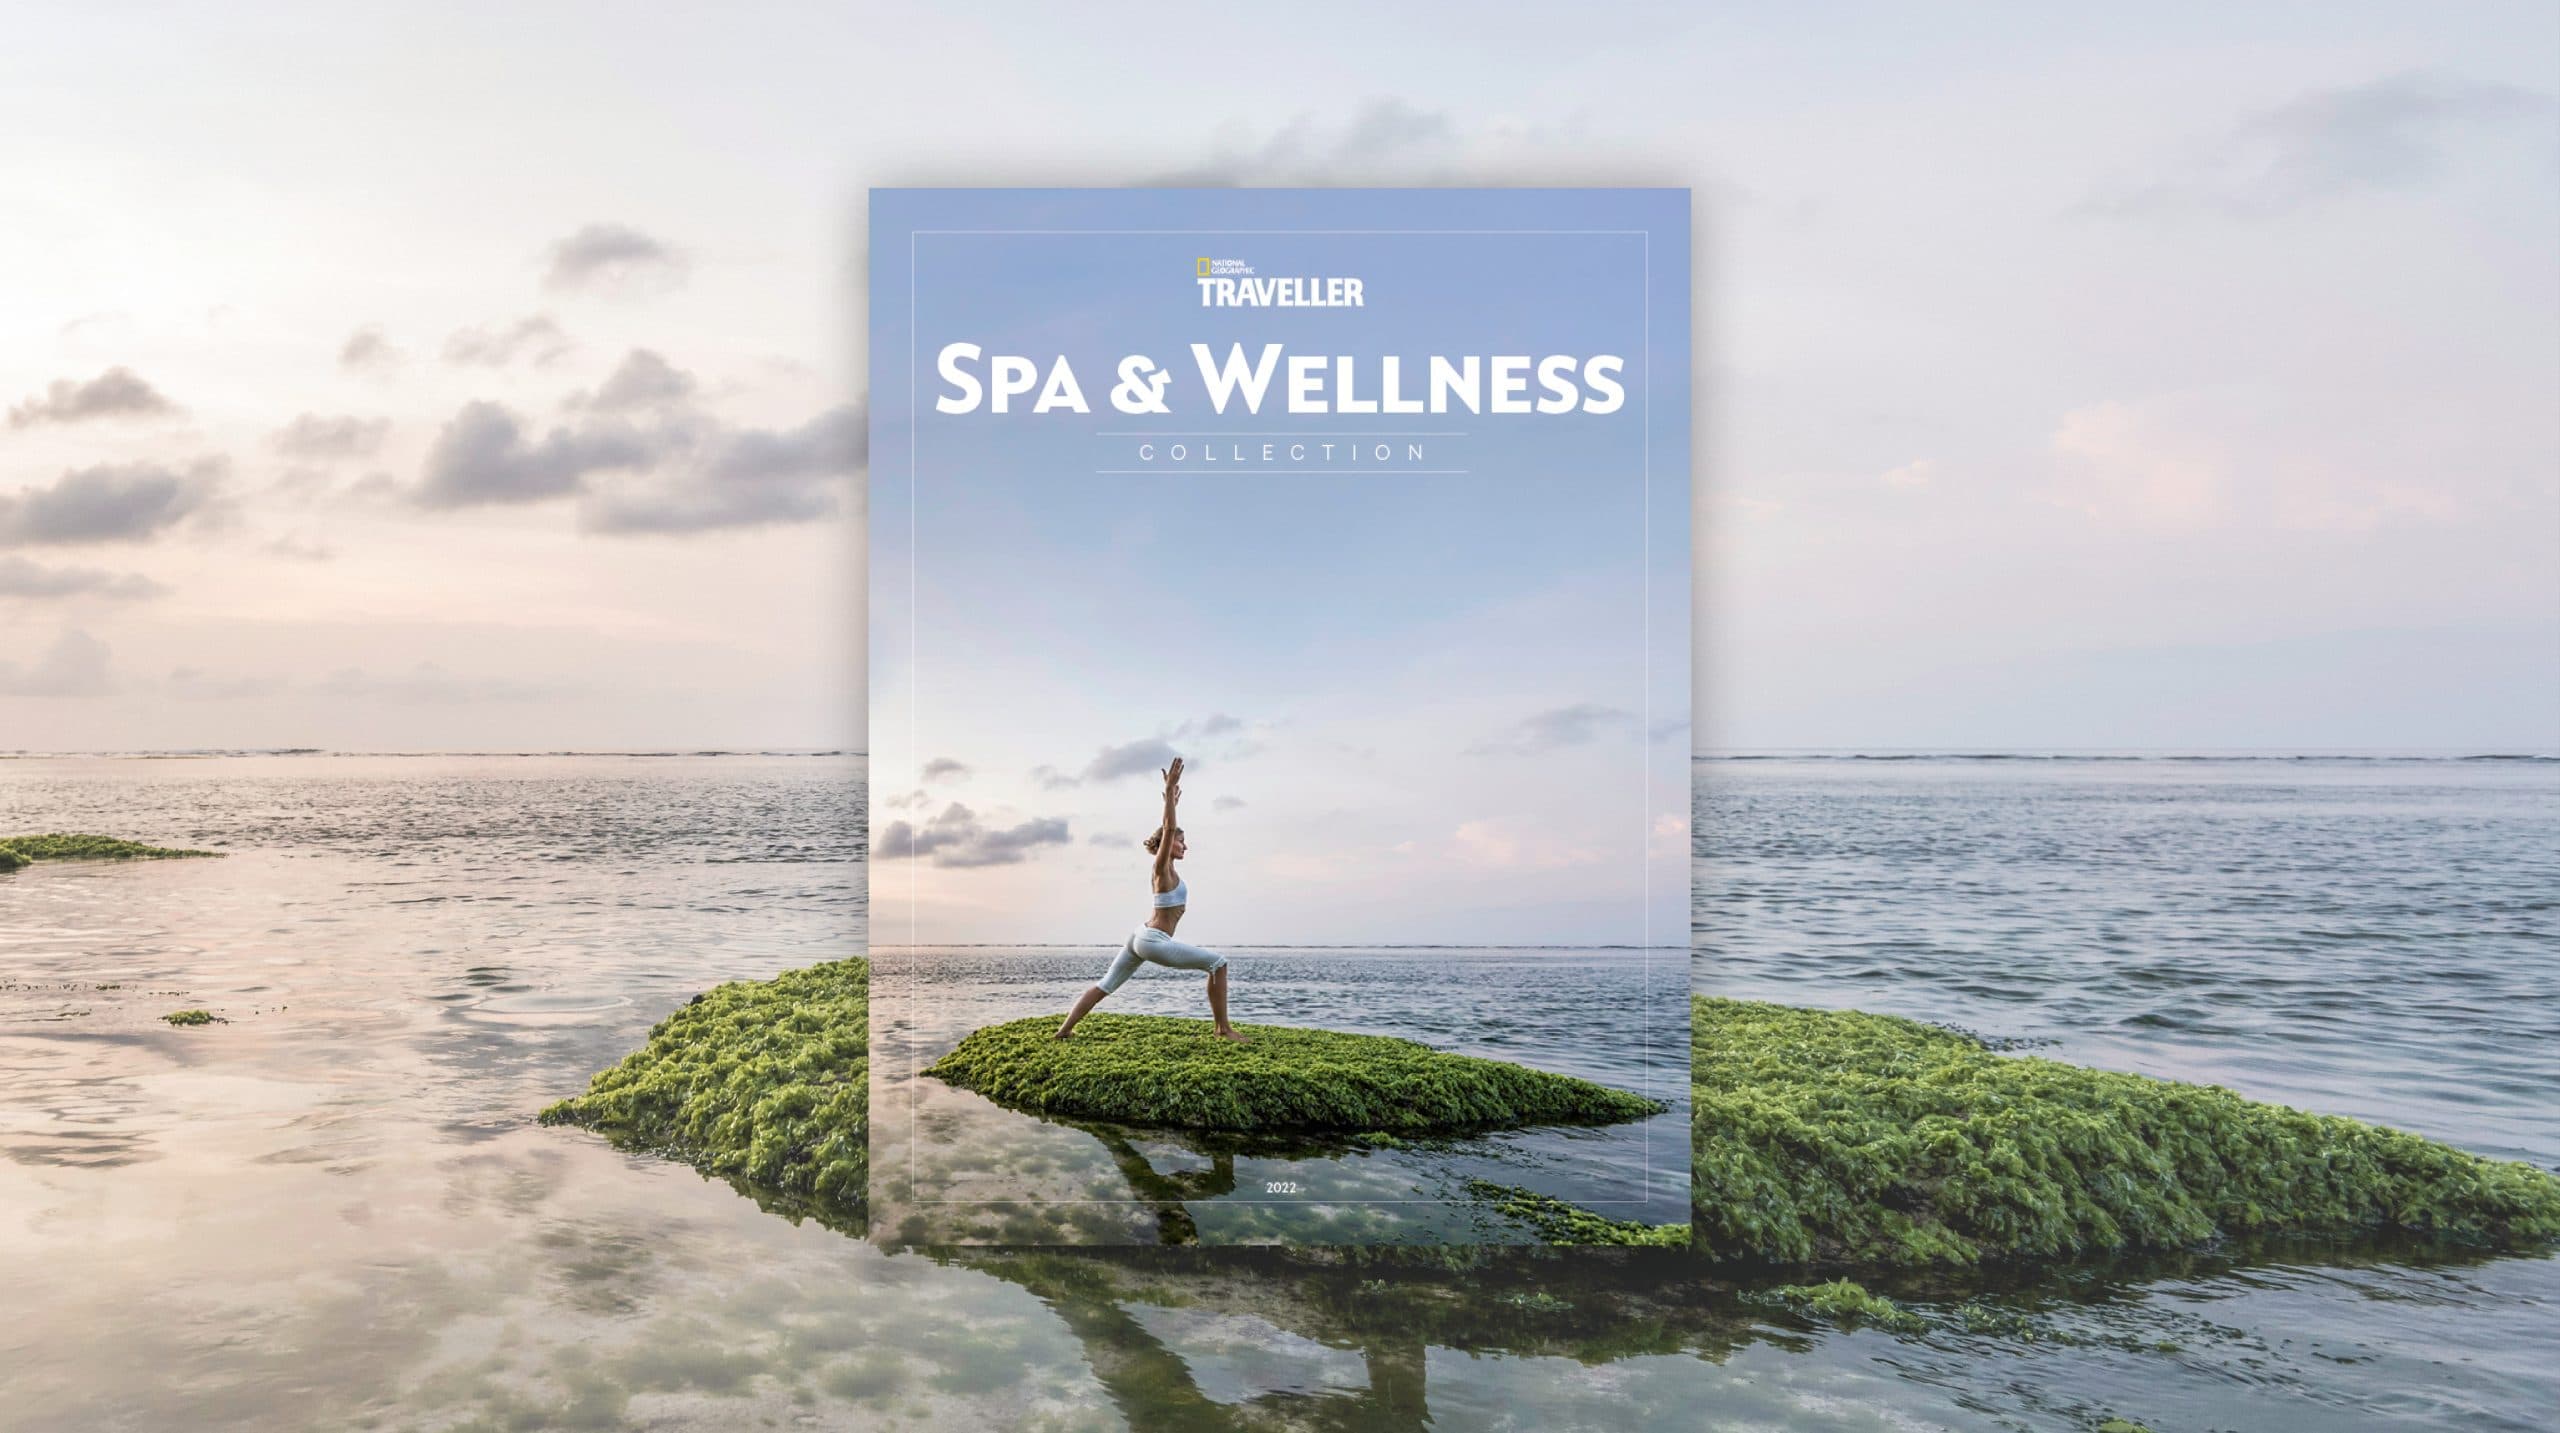 The National Geographic Traveller (UK) Spa & Wellness Collection 2022.